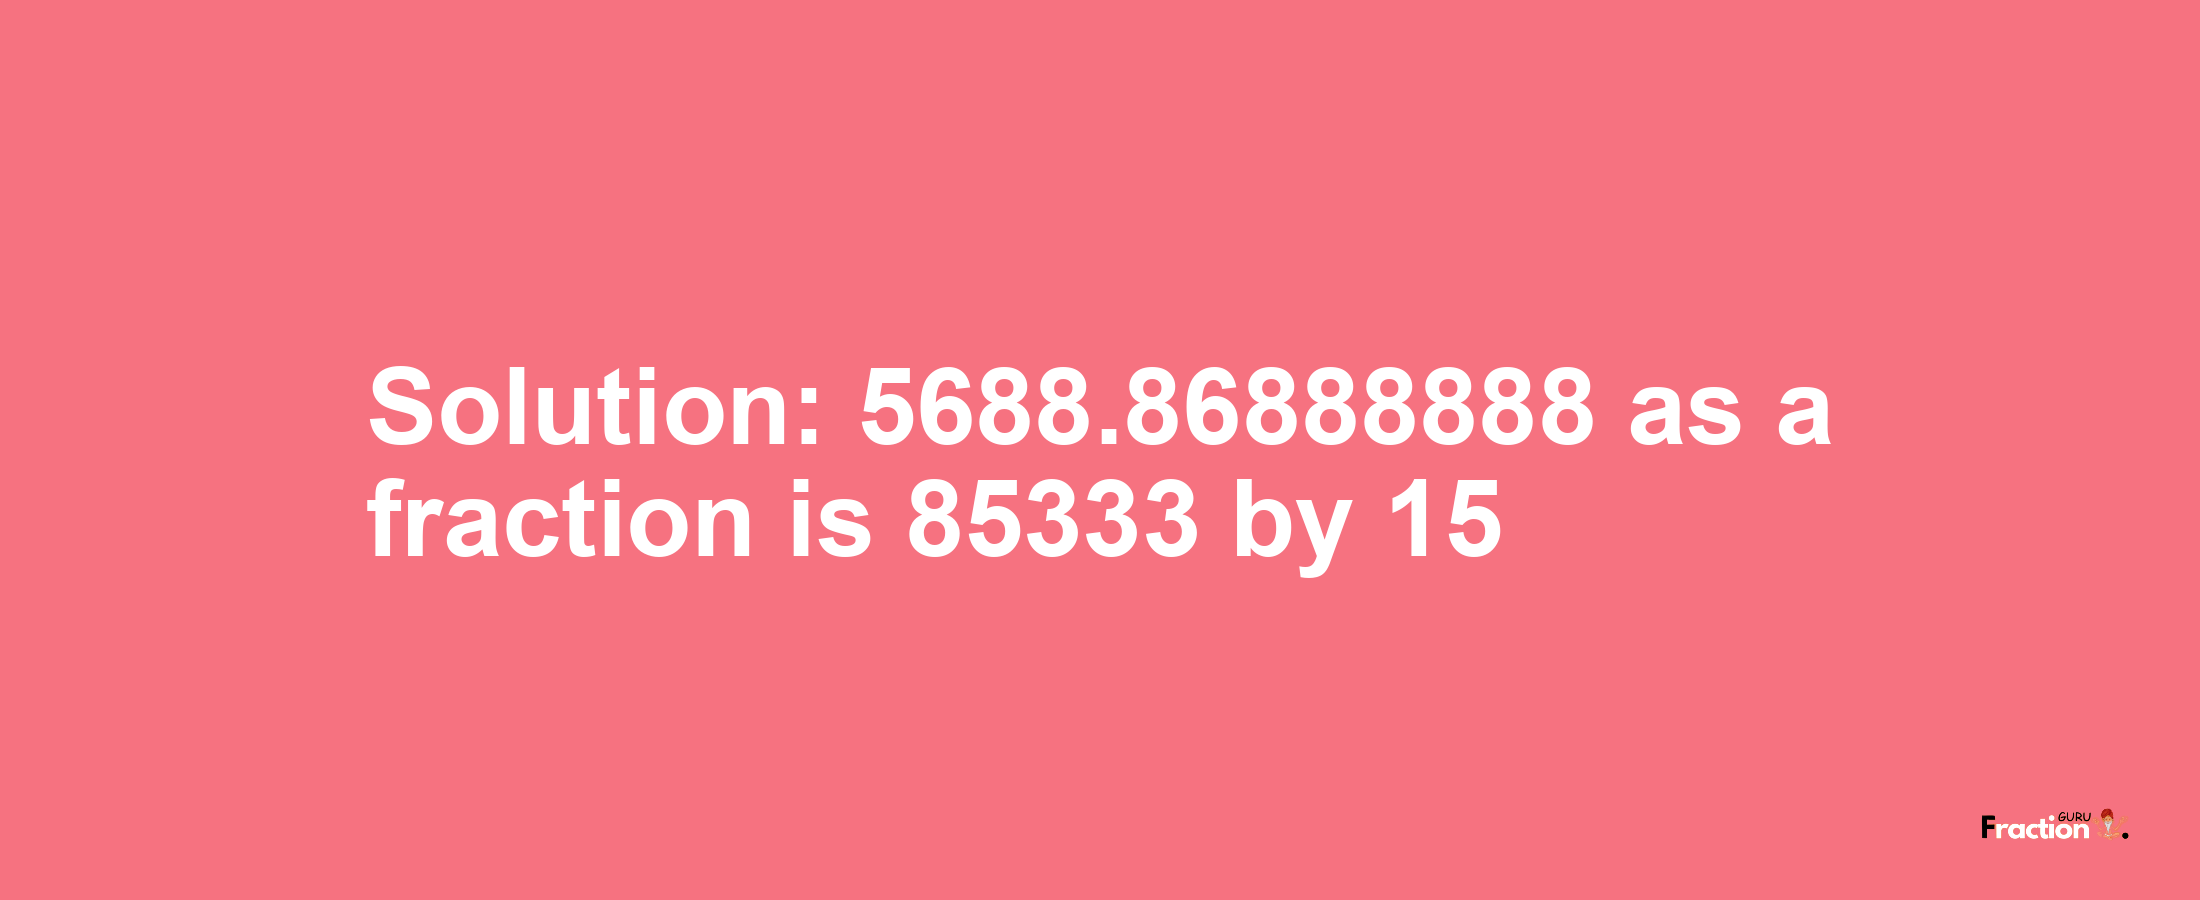 Solution:5688.86888888 as a fraction is 85333/15